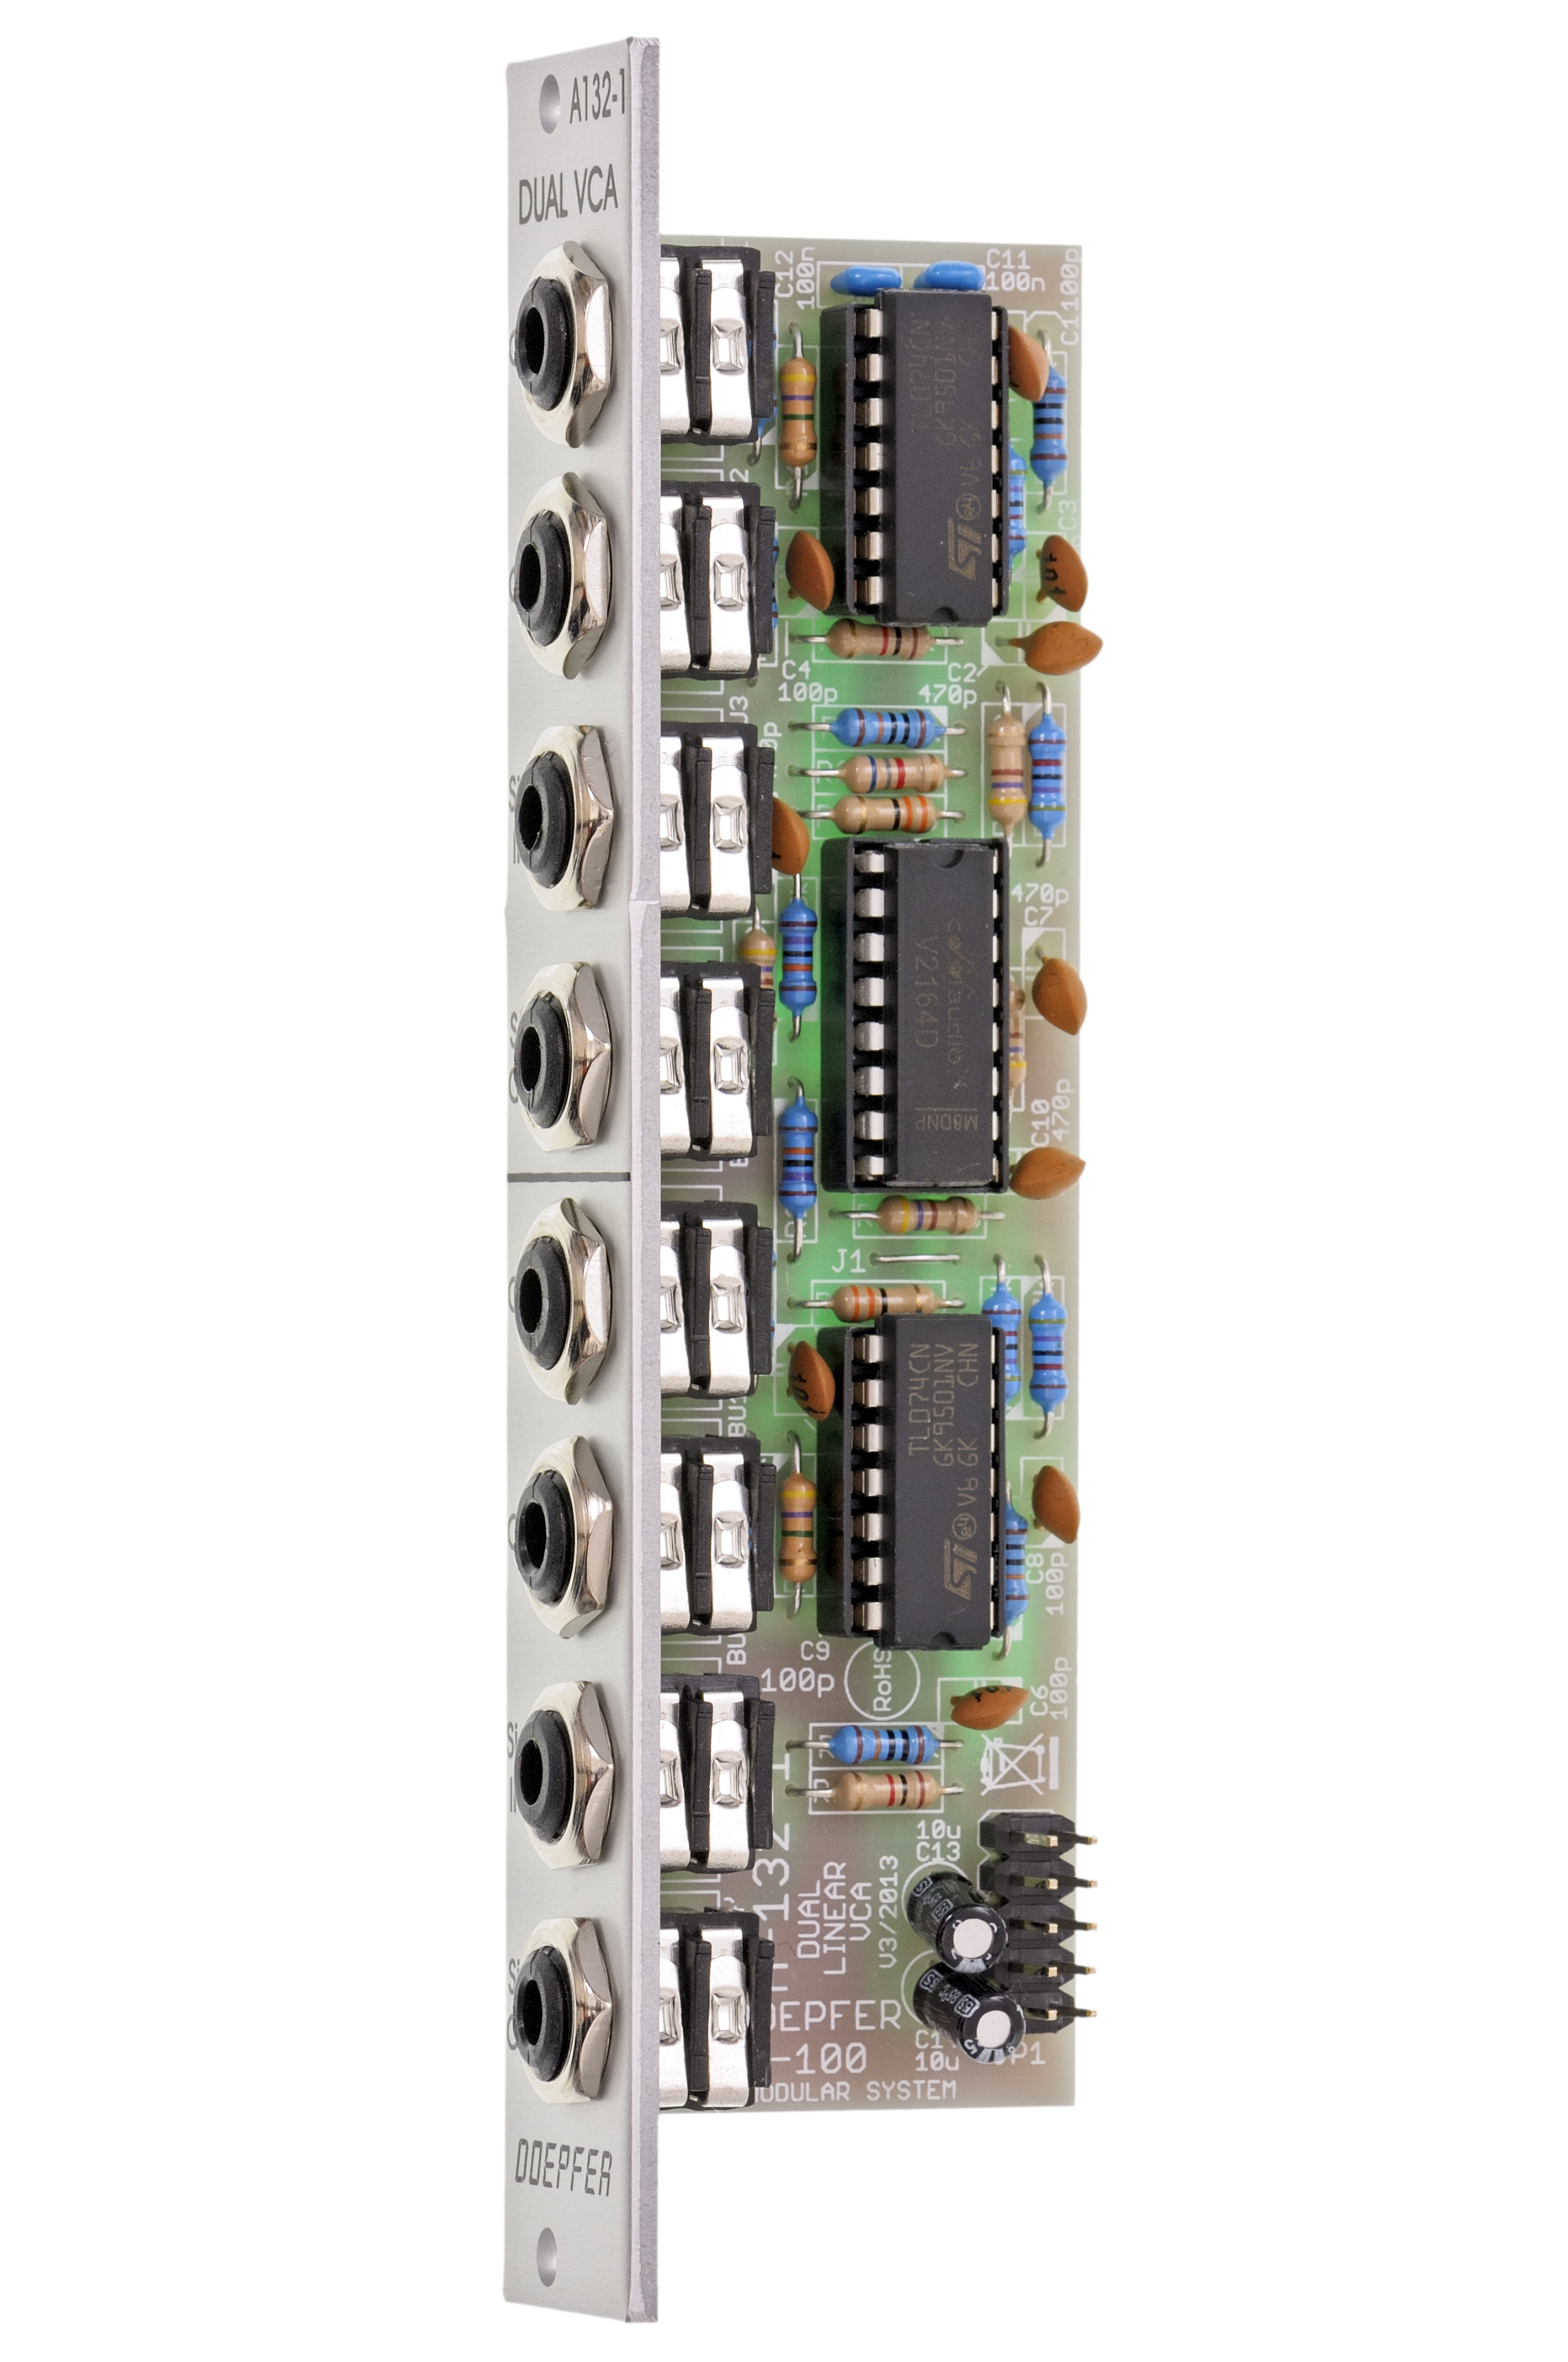 A-132-1 Dual Low Cost VCA